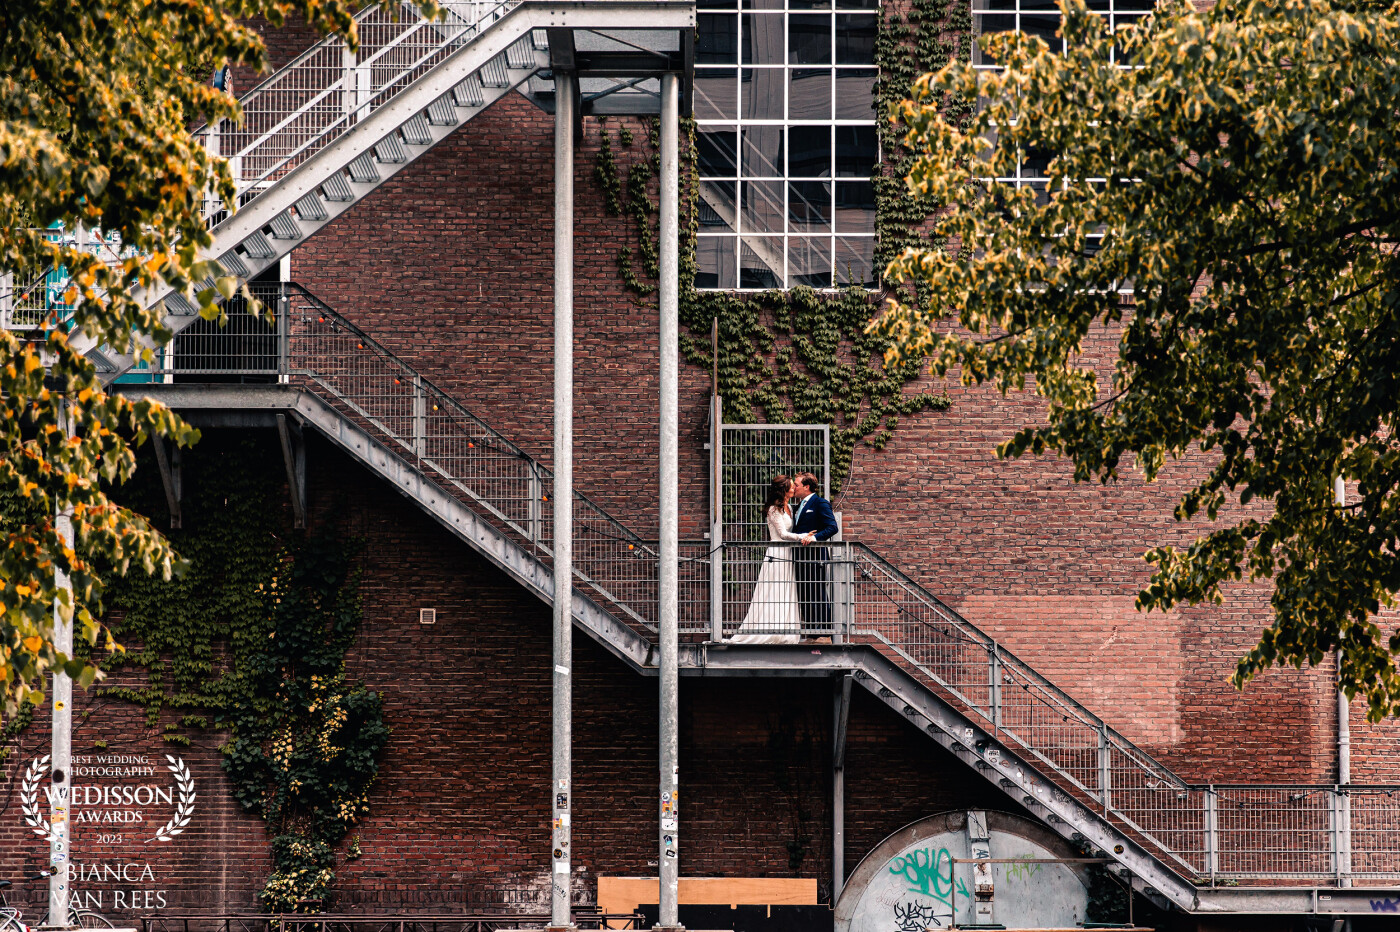 This couple got married at the industrial site Strijp-S. It is a famous area in Eindhoven city (where I live), and the architecture of the buildings is very cool. I knew i wanted to capture this photo, I had it in my head before the wedding, and it turned out so cool! It's all about using the environment to create stunning shots. Nothing more.